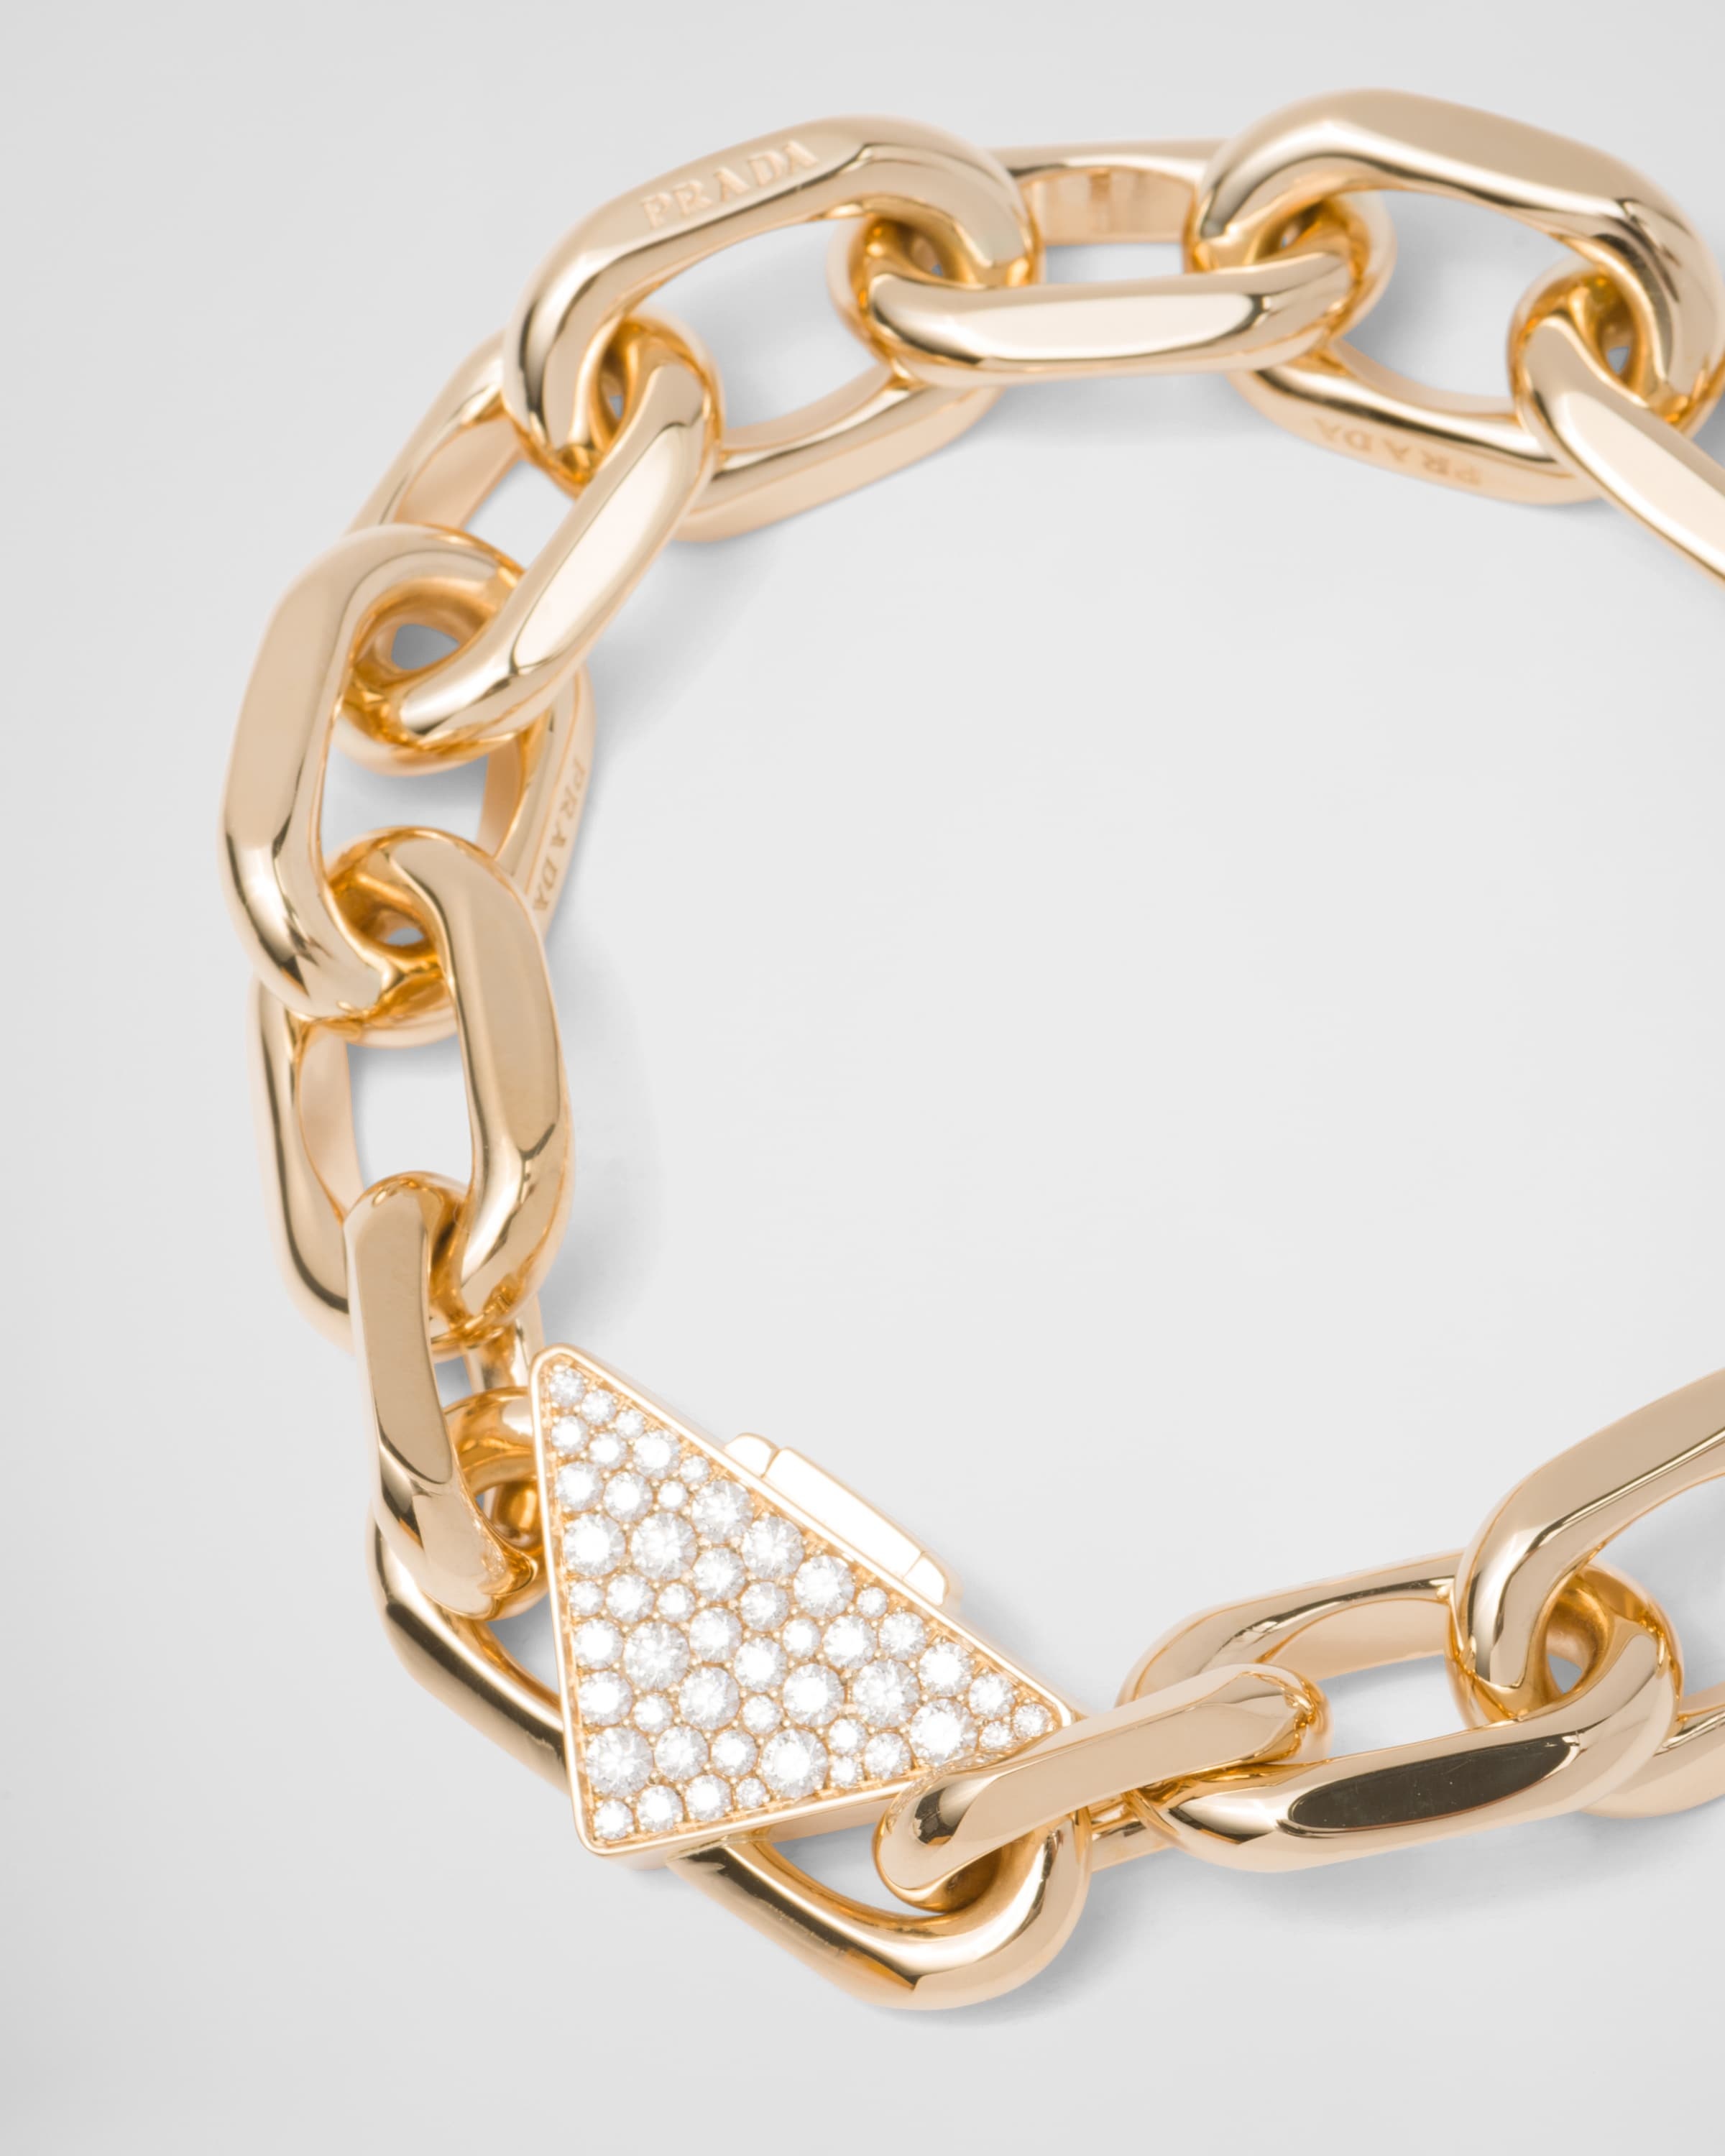 Eternal Gold chain bracelet in yellow gold with diamonds - 2